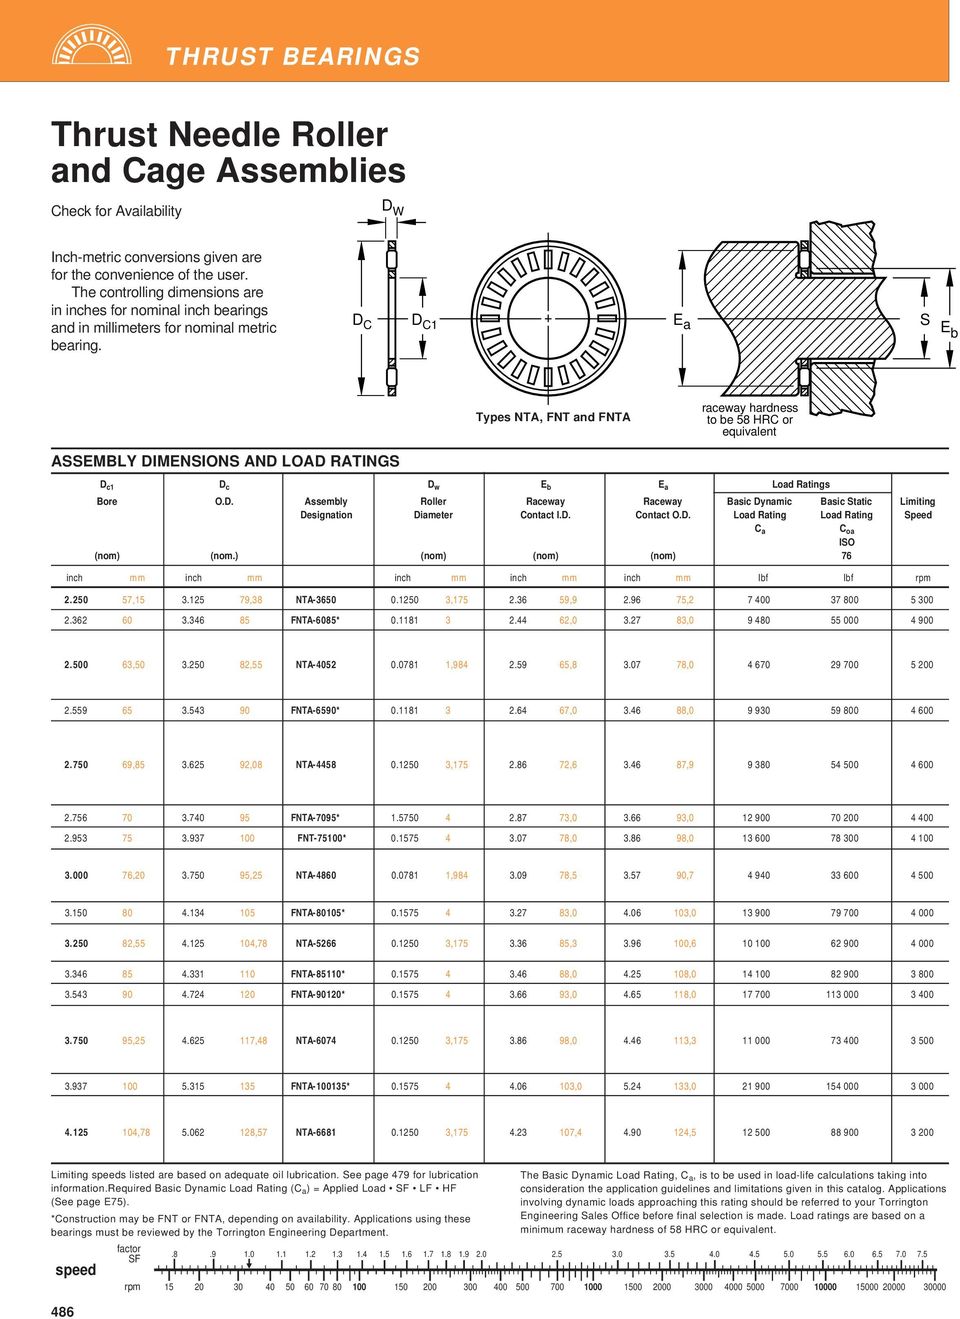 D C D C1 E a S Eb Types NTA, FNT and FNTA raceway hardness to be 58 HRC or equivalent ASSEMBLY DIMENSIONS AND LOAD RATINGS D c1 D c D w E b E a Load Ratings Bore O.D. Assembly Roller Raceway Raceway Basic Dynamic Basic Static Limiting Designation Diameter Contact I.